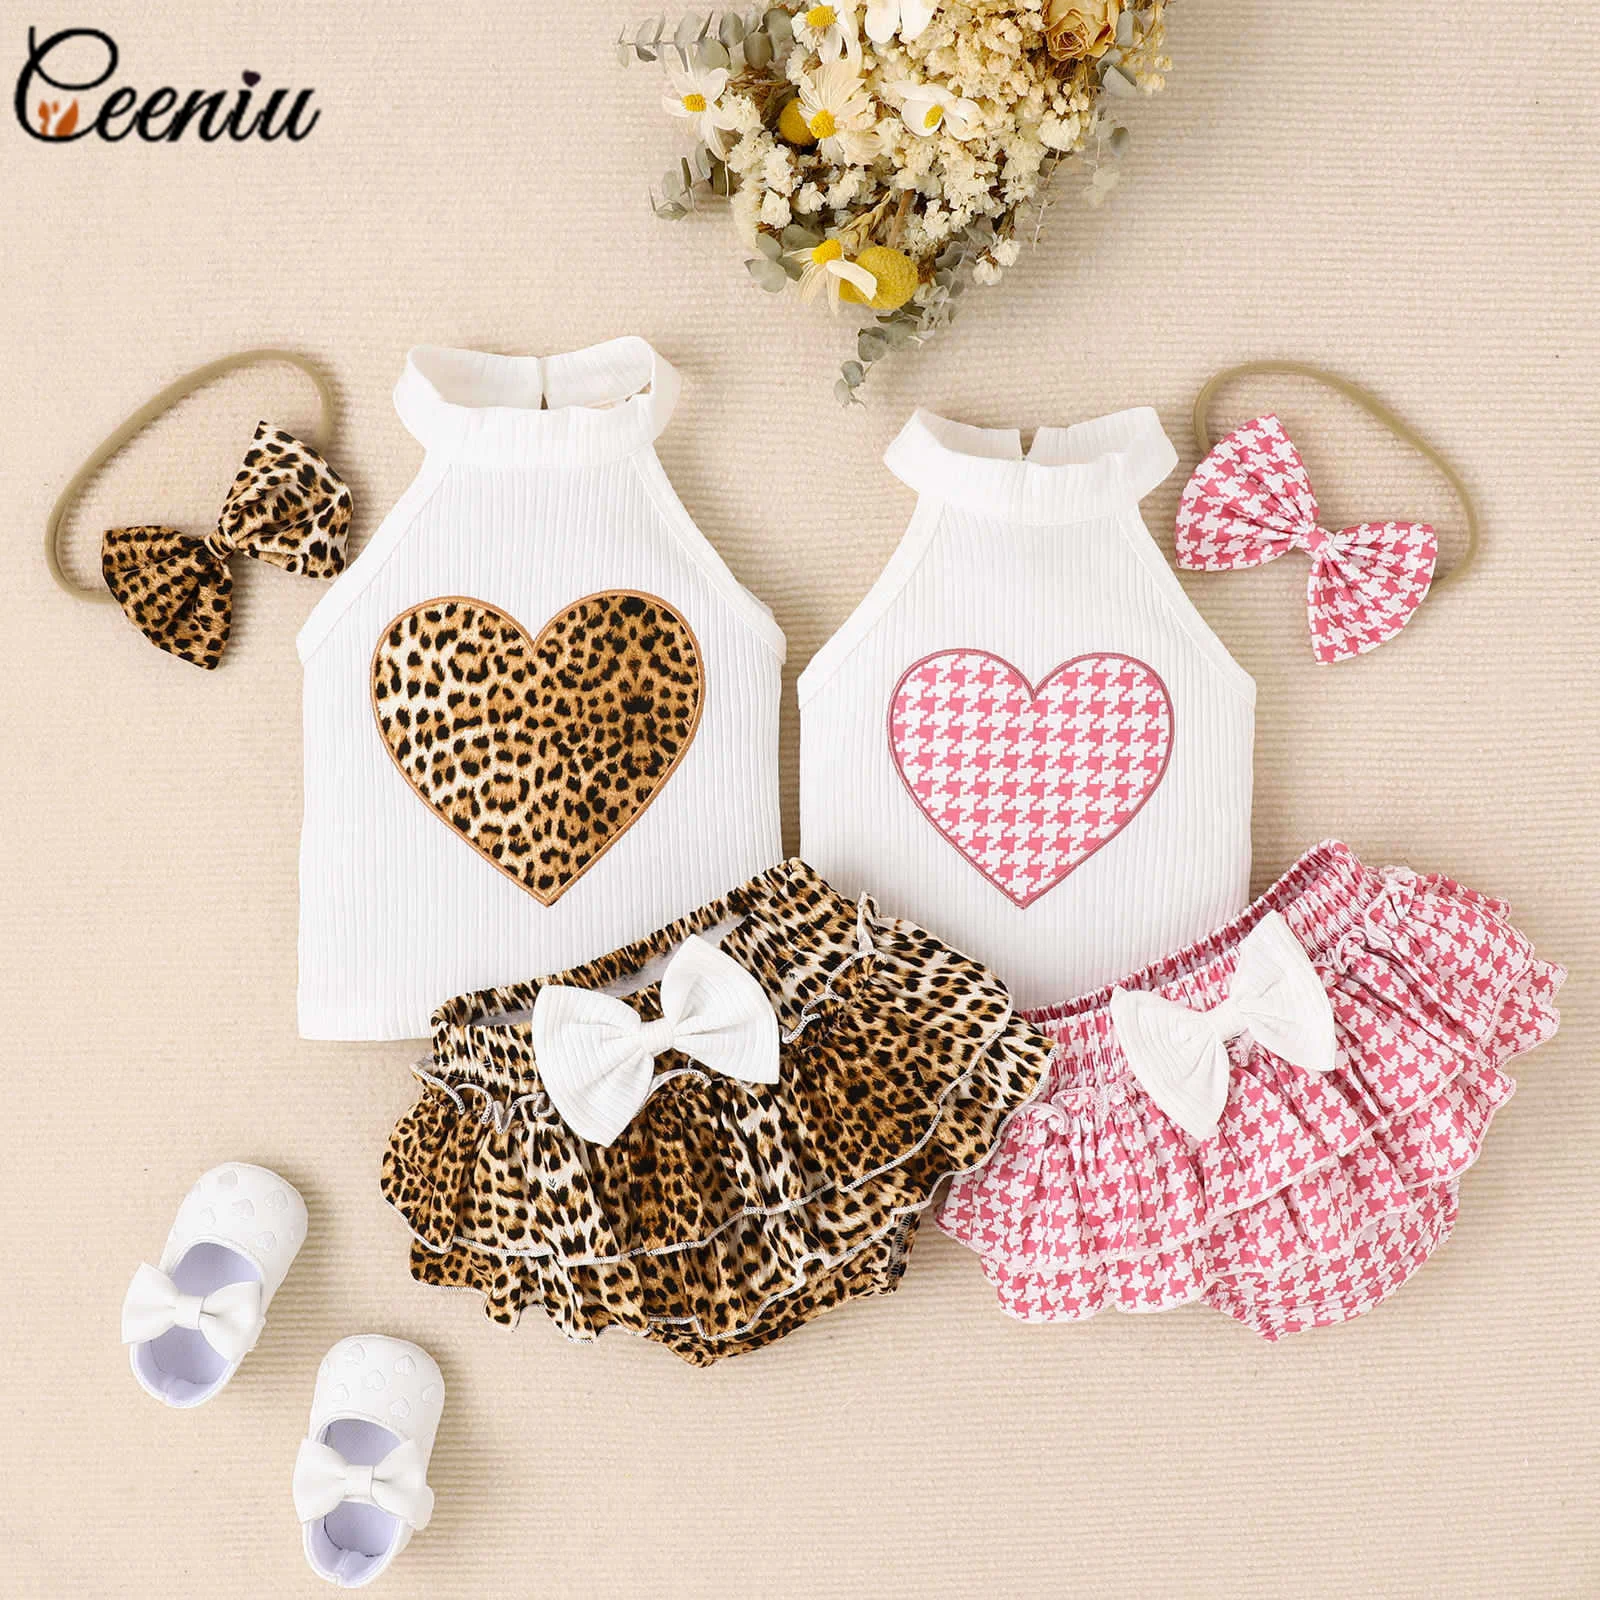 

Ceeniu Summer Outfits For Girls Newborn Baby Heart Leopard Halter Top+Layered Leopard PP Pants 3pcs Sets For Girls Baby Clothes